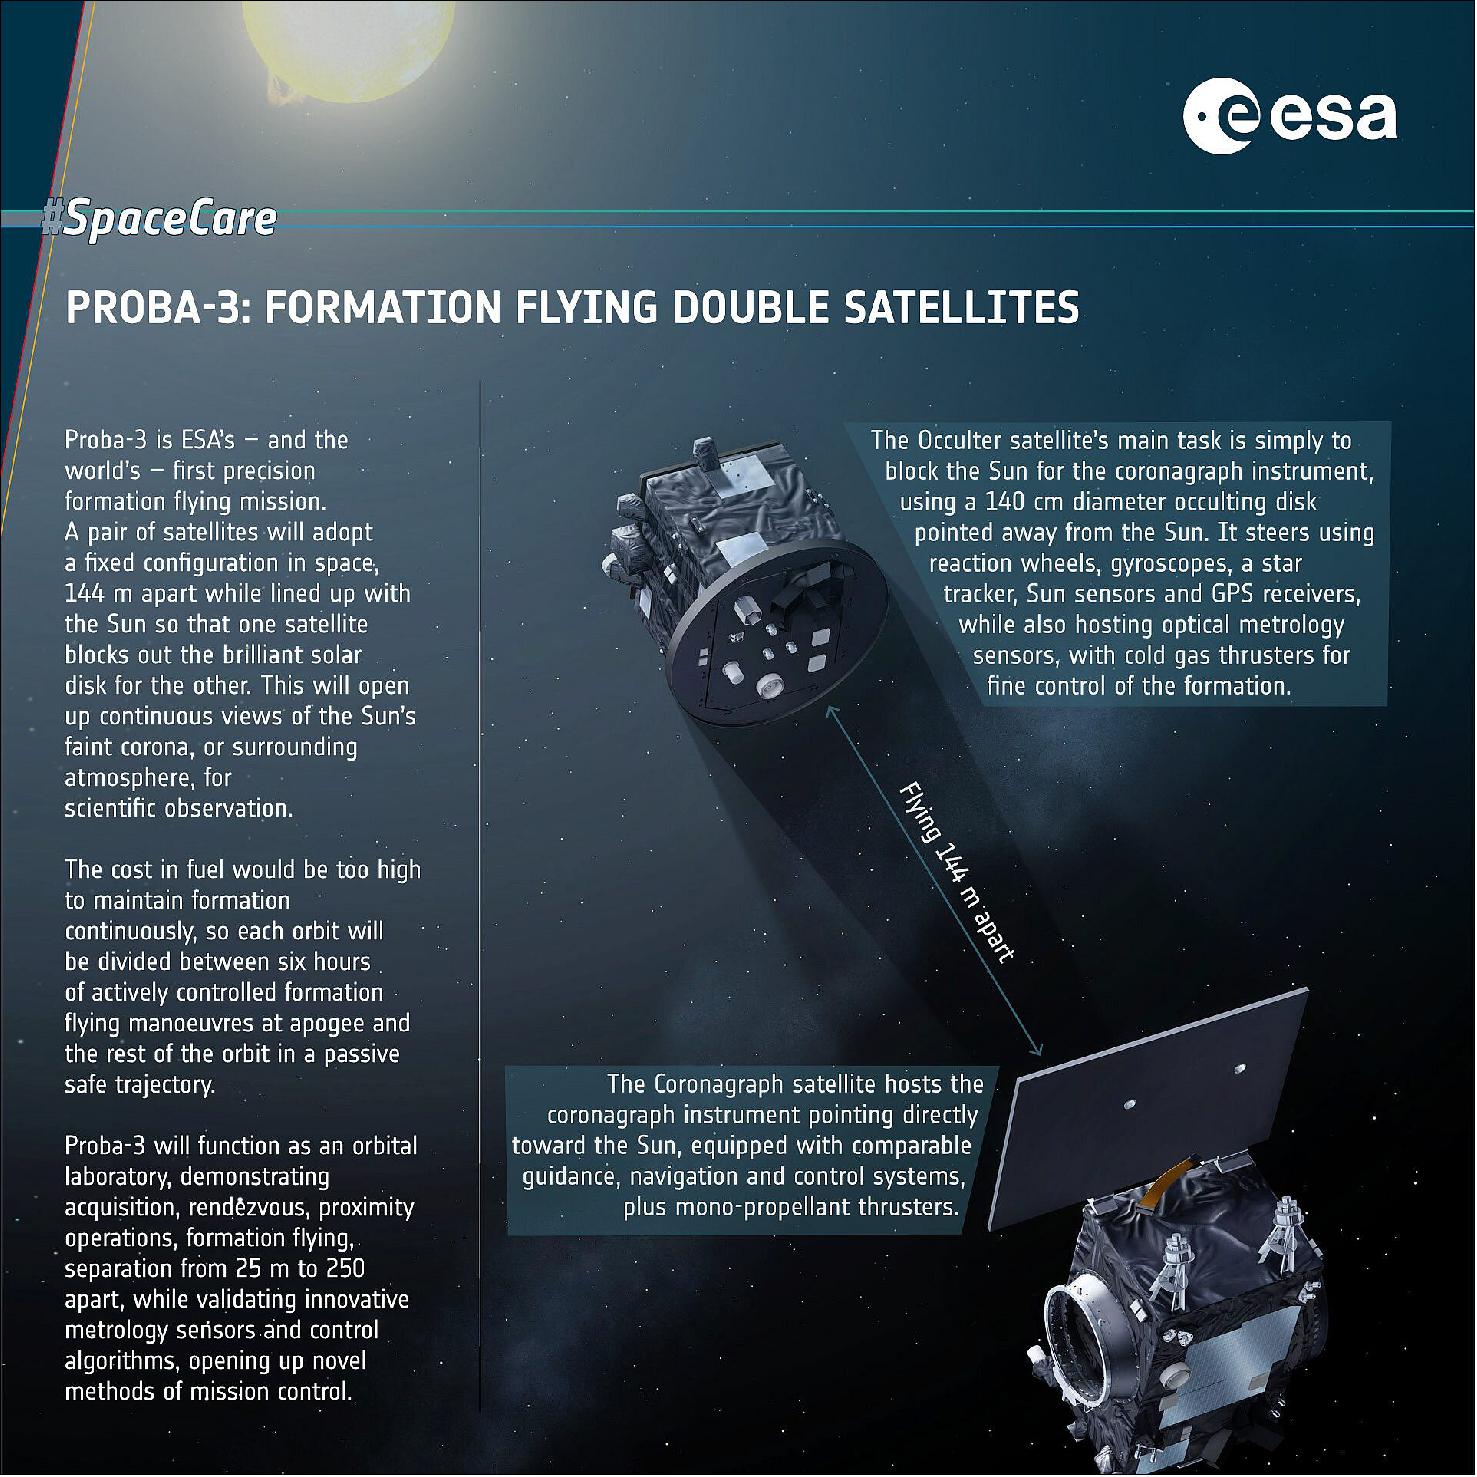 Figure 28: PROBA-3 is ESA’s – and the world’s – first precision formation flying mission. A pair of satellites will adopt a fixed configuration in space, 144 m apart while lined up with the Sun so that one satellite blocks out the brilliant solar disk for the other. This will open up continuous views of the Sun’s faint corona, or surrounding atmosphere, for scientific observation (image credit: ESA, F. Zonno)